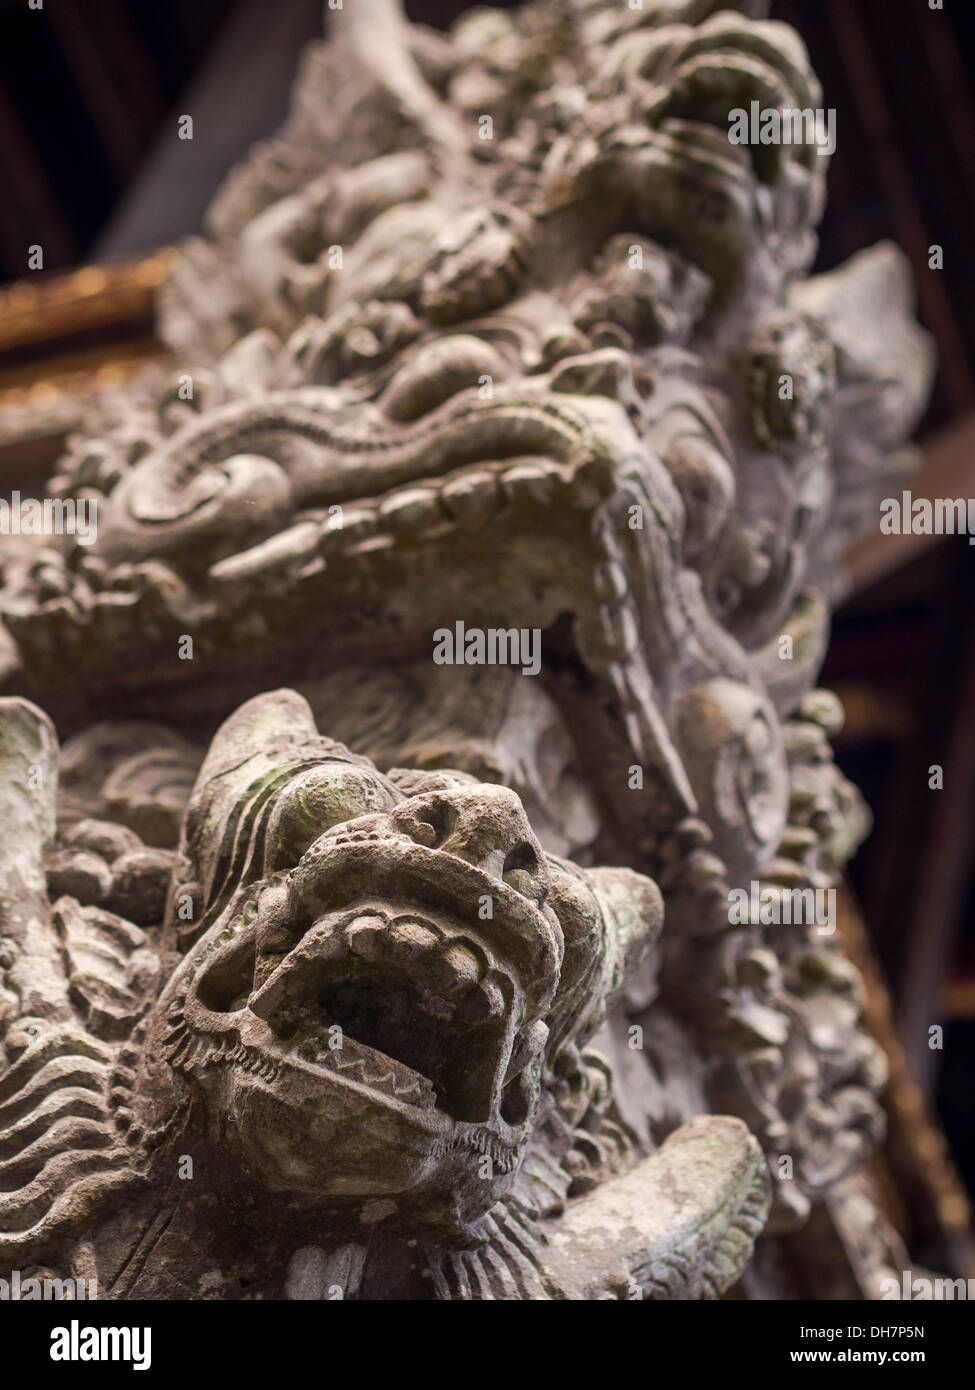 Carvings depicting demons and deities from Balinese mythology adorn the Pura Dalem Agung Padangtegal temple in Ubud, Bali. Stock Photo